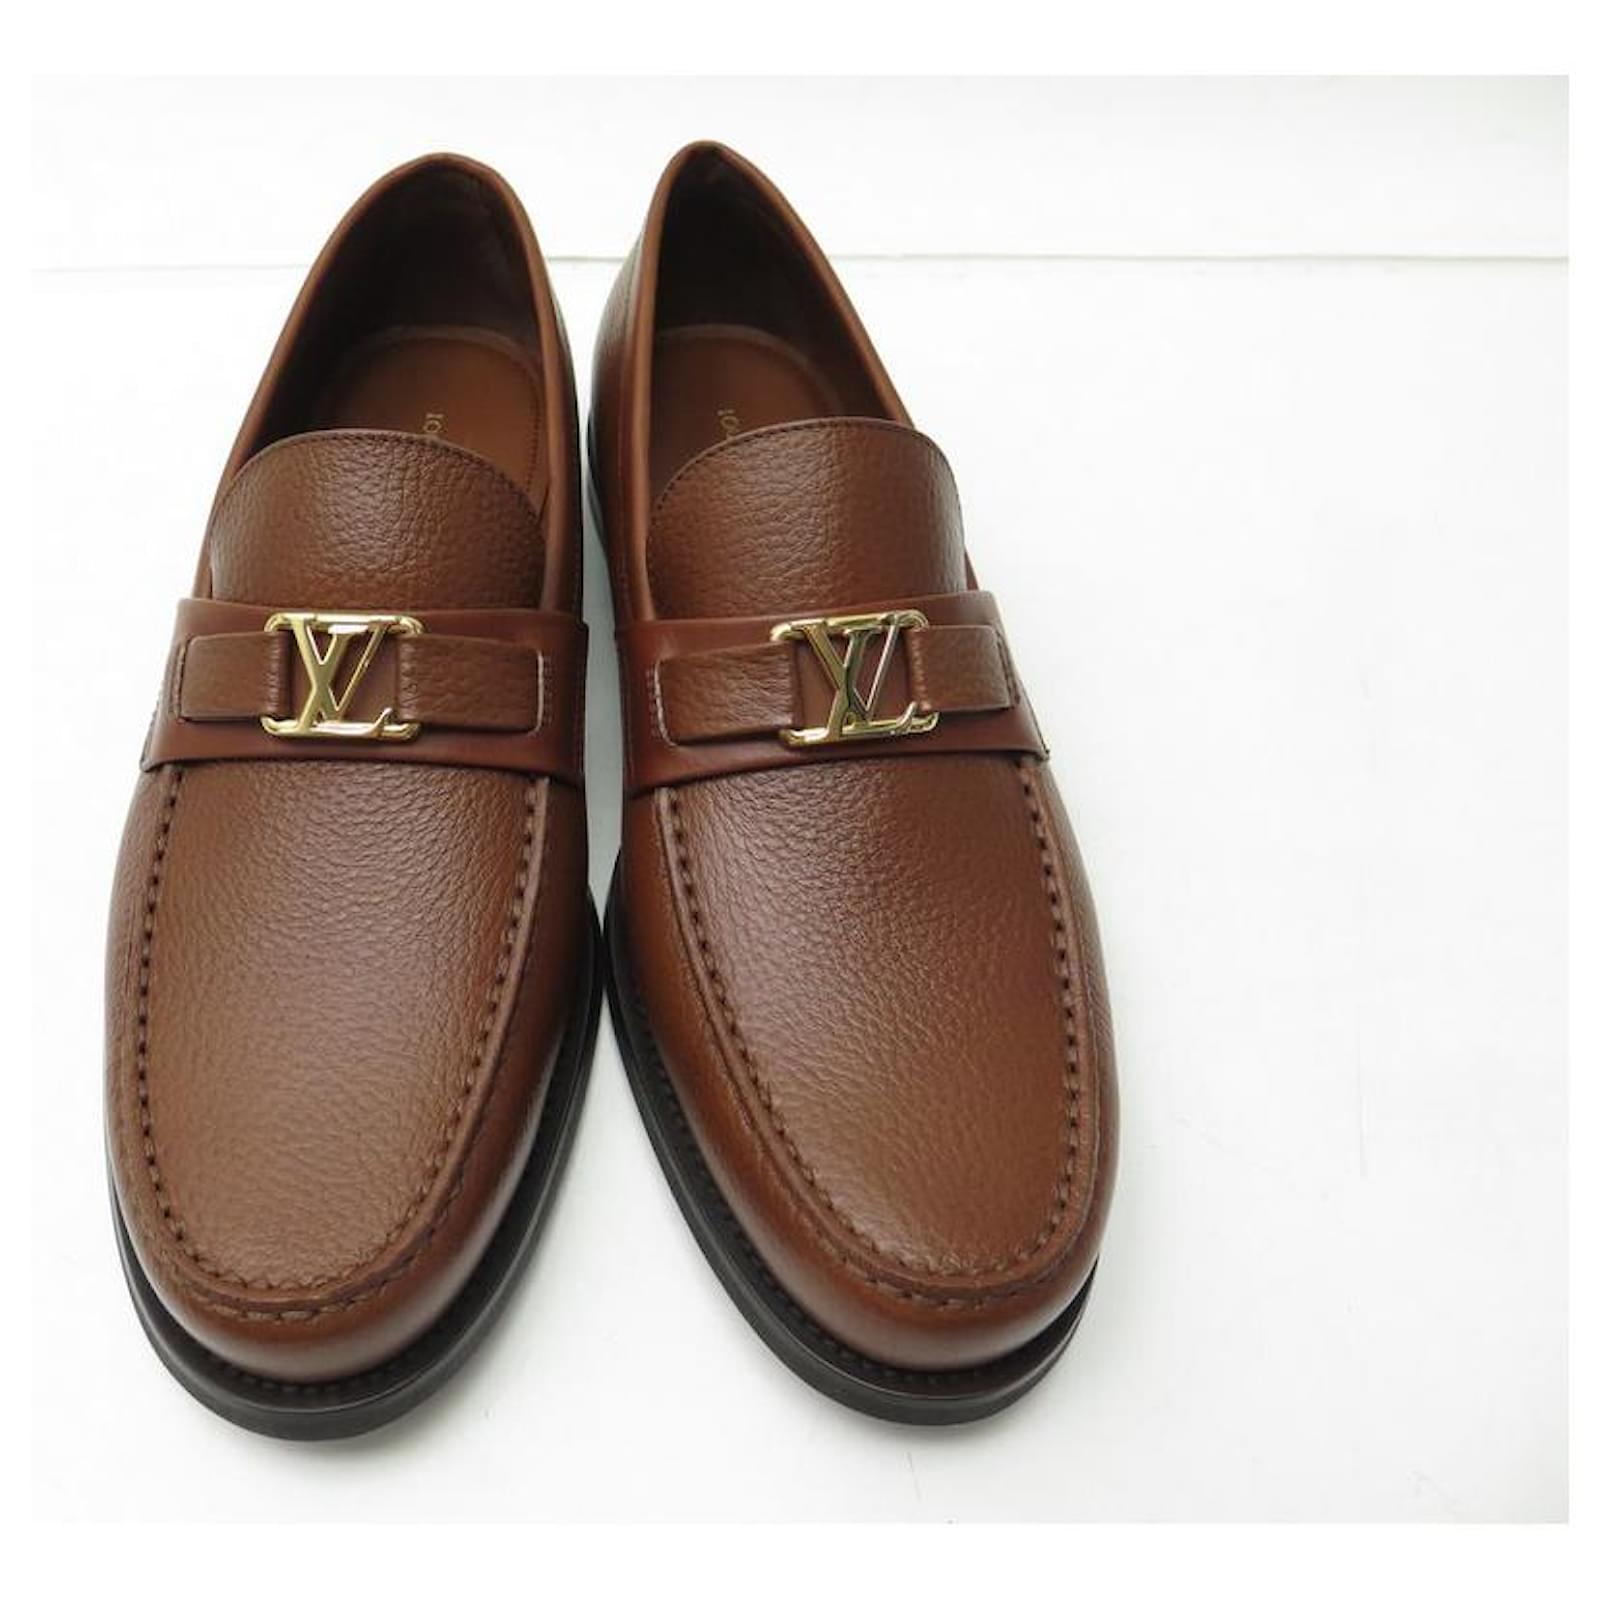 Rich Kids Rich Lifestyle - 'Louis Vuitton Loafer' is now available in size  6-7-8-9-10 for INR 1,499/- Free Ship all over India For order Dm or Contact  us on 9654657778 #brandedgallery #delhi